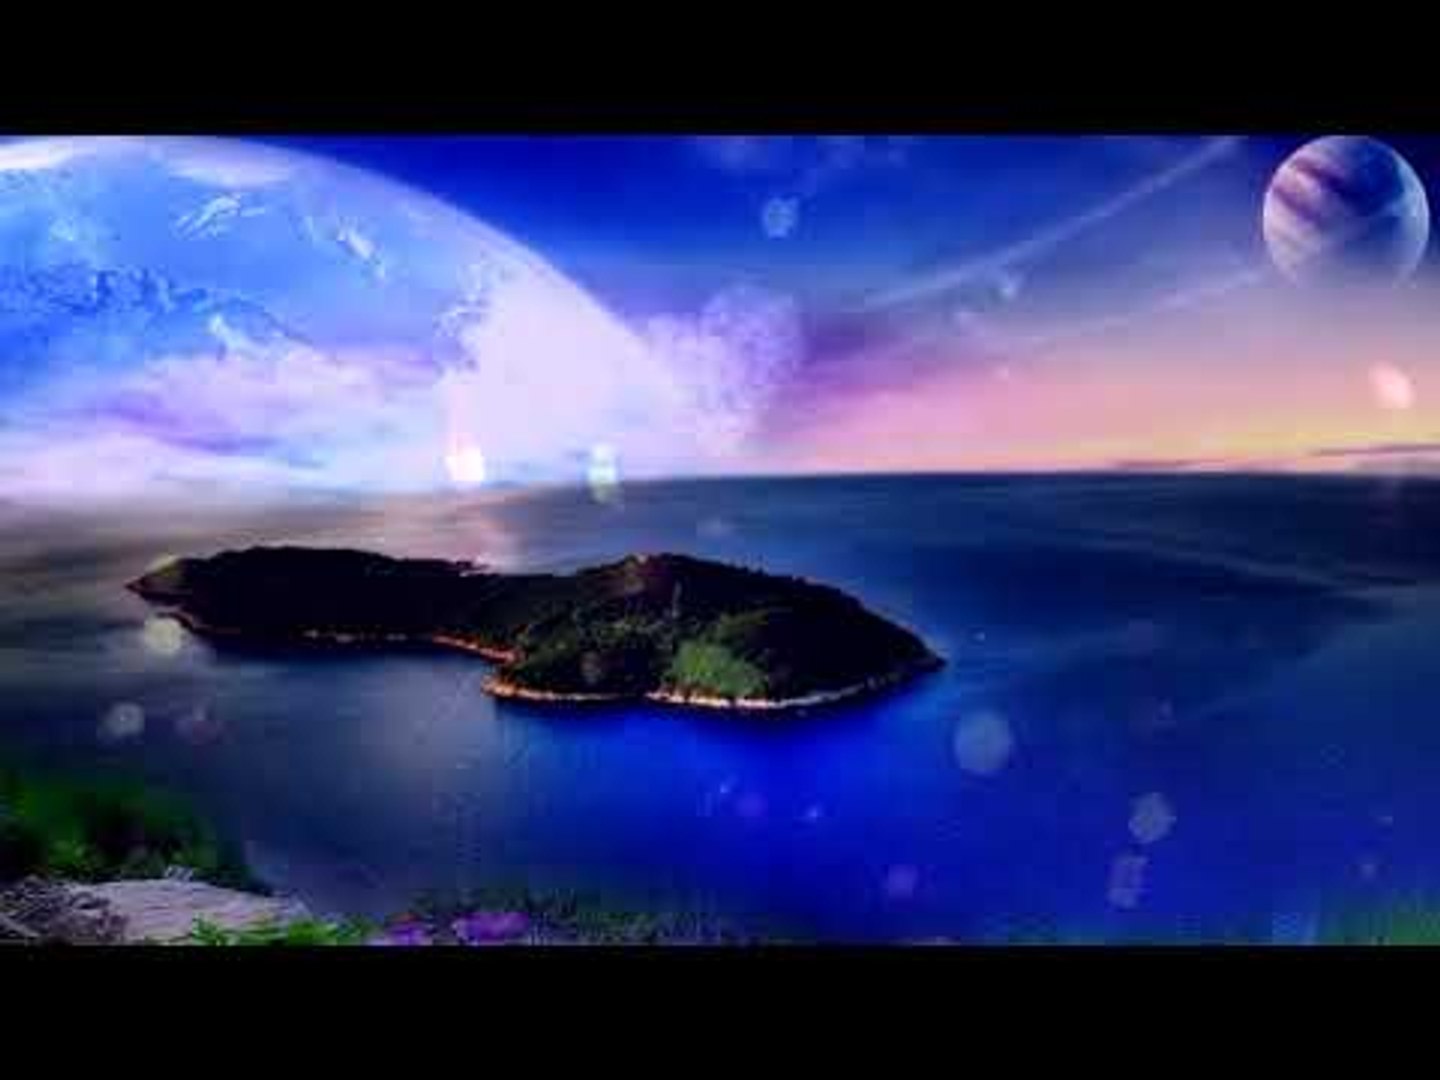 Electronic Meditation Music - Meditation Music for Concentration, Relaxation Music